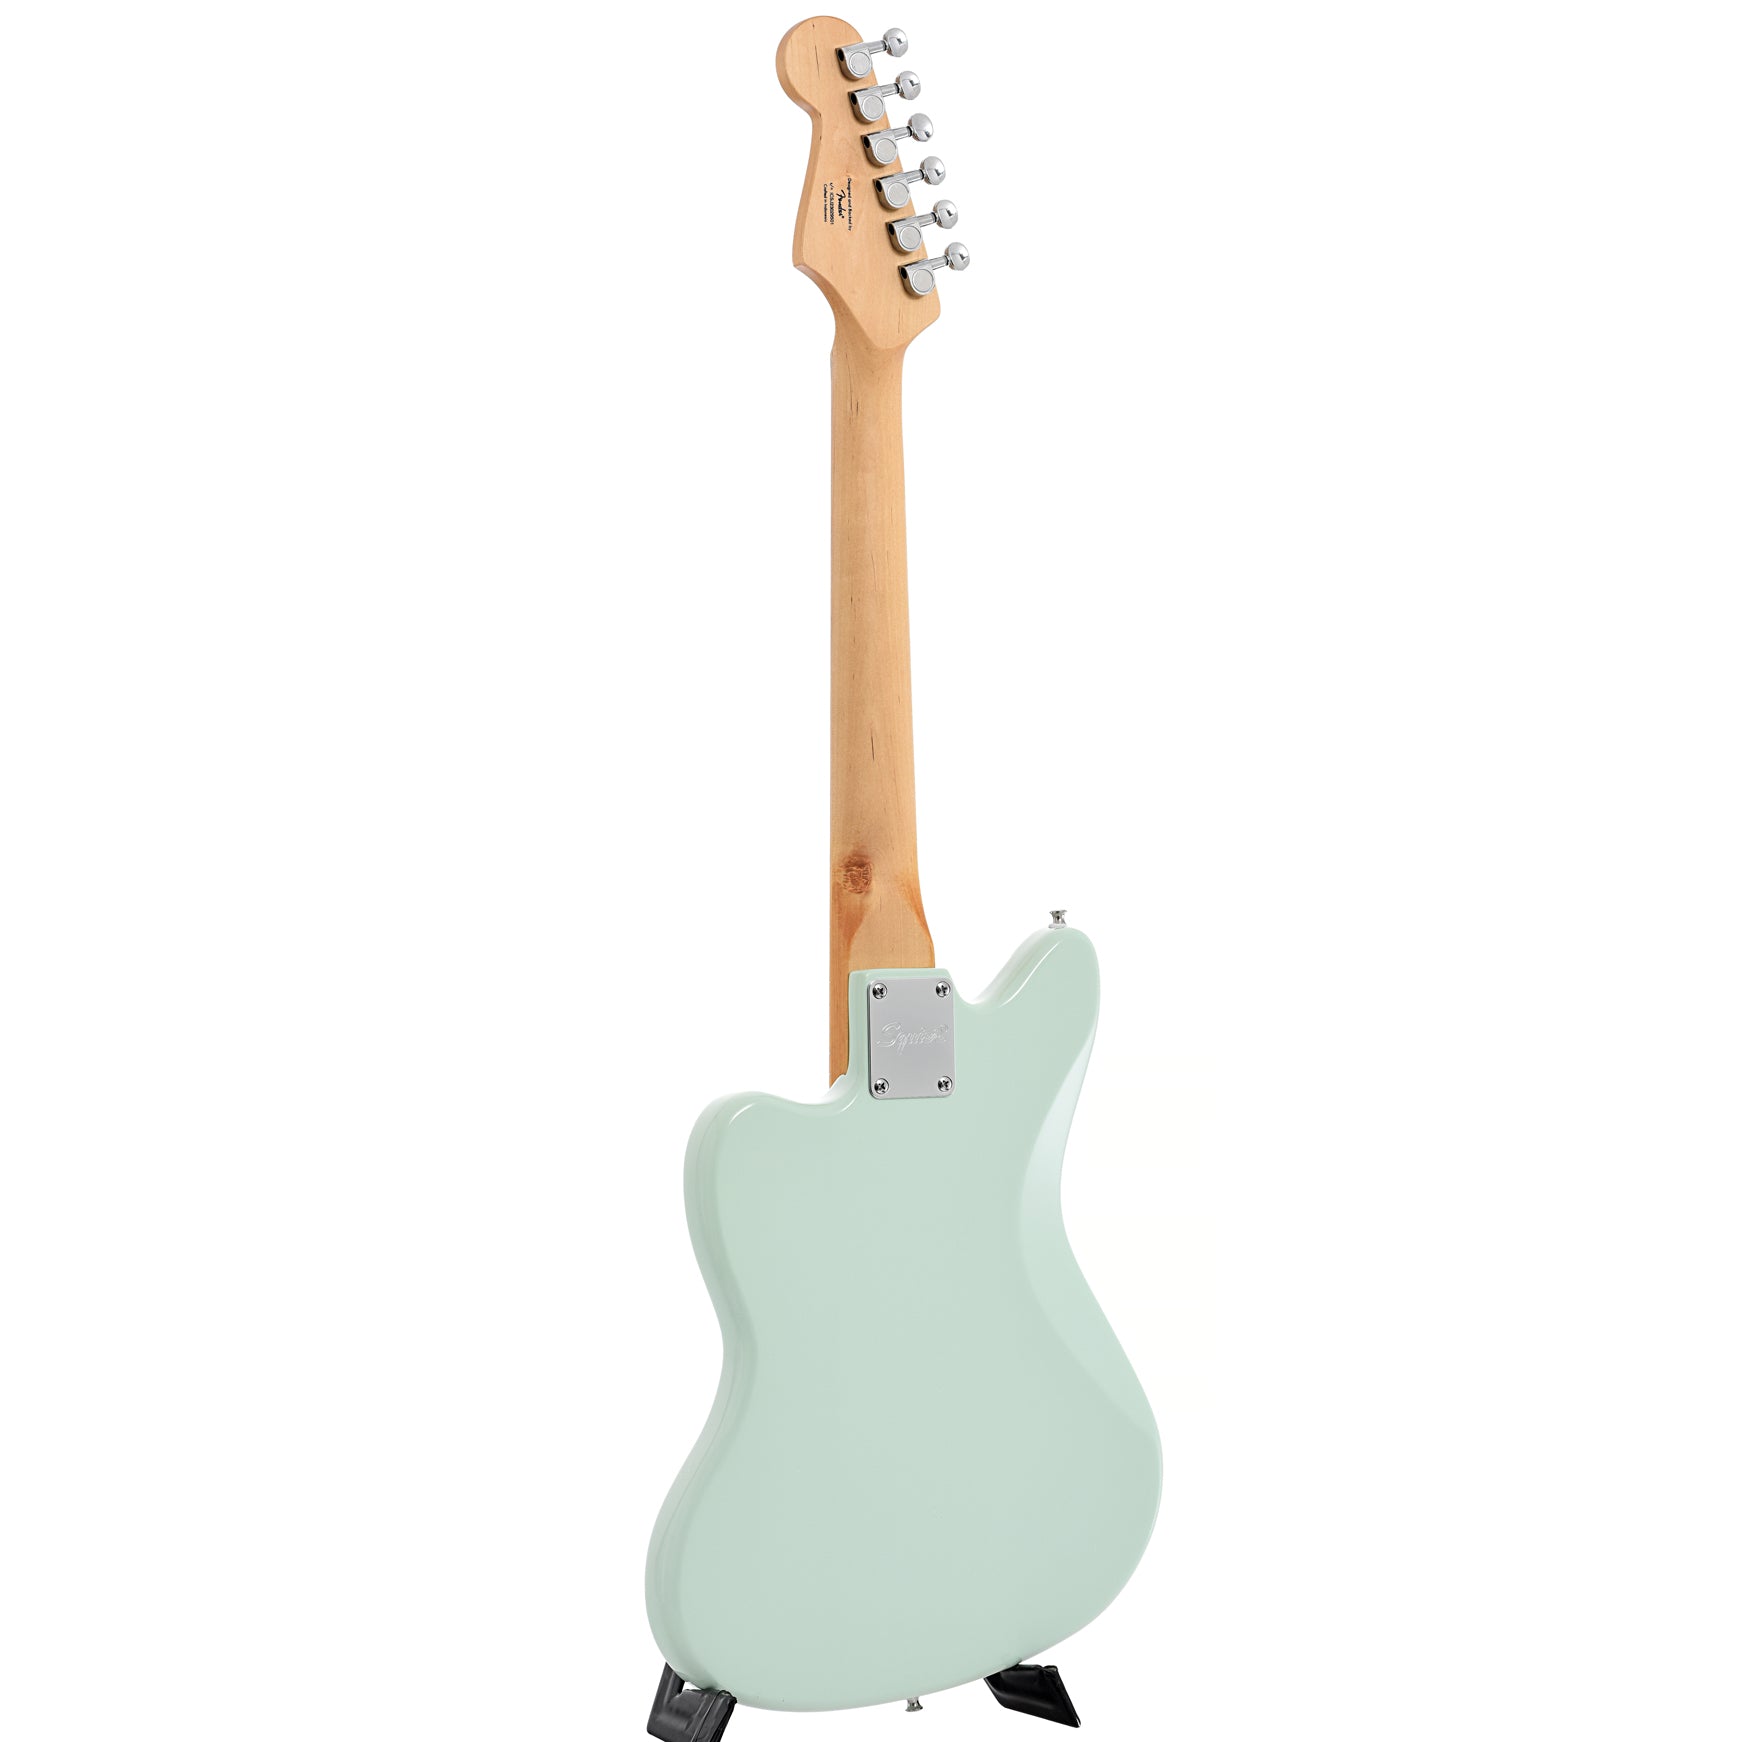 Full back and side of Squier Mini Jazzmaster HH, Surf Green